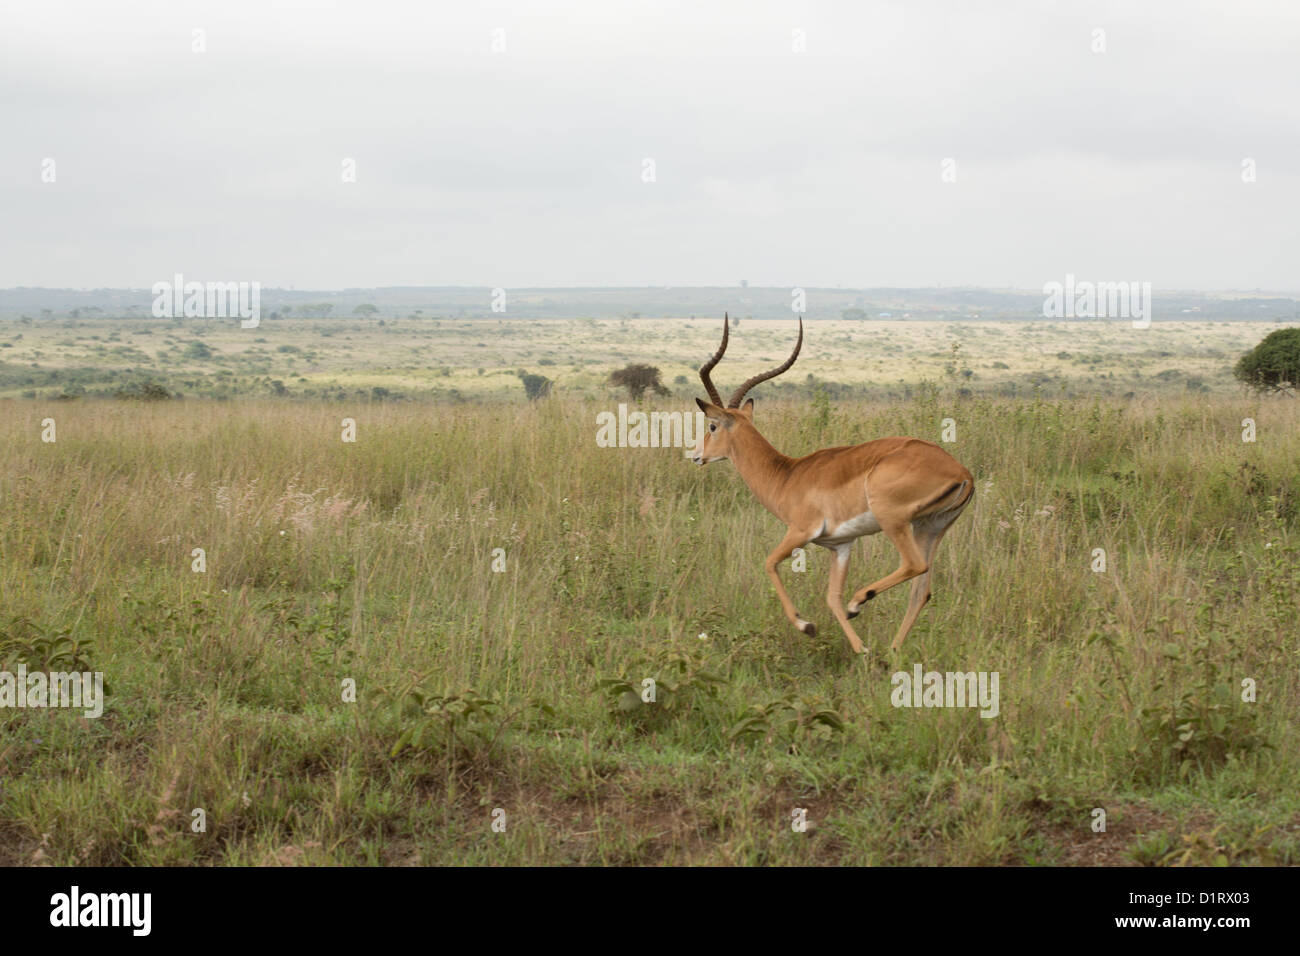 An impala running in the grasslands of the Nairobi National Park Stock Photo